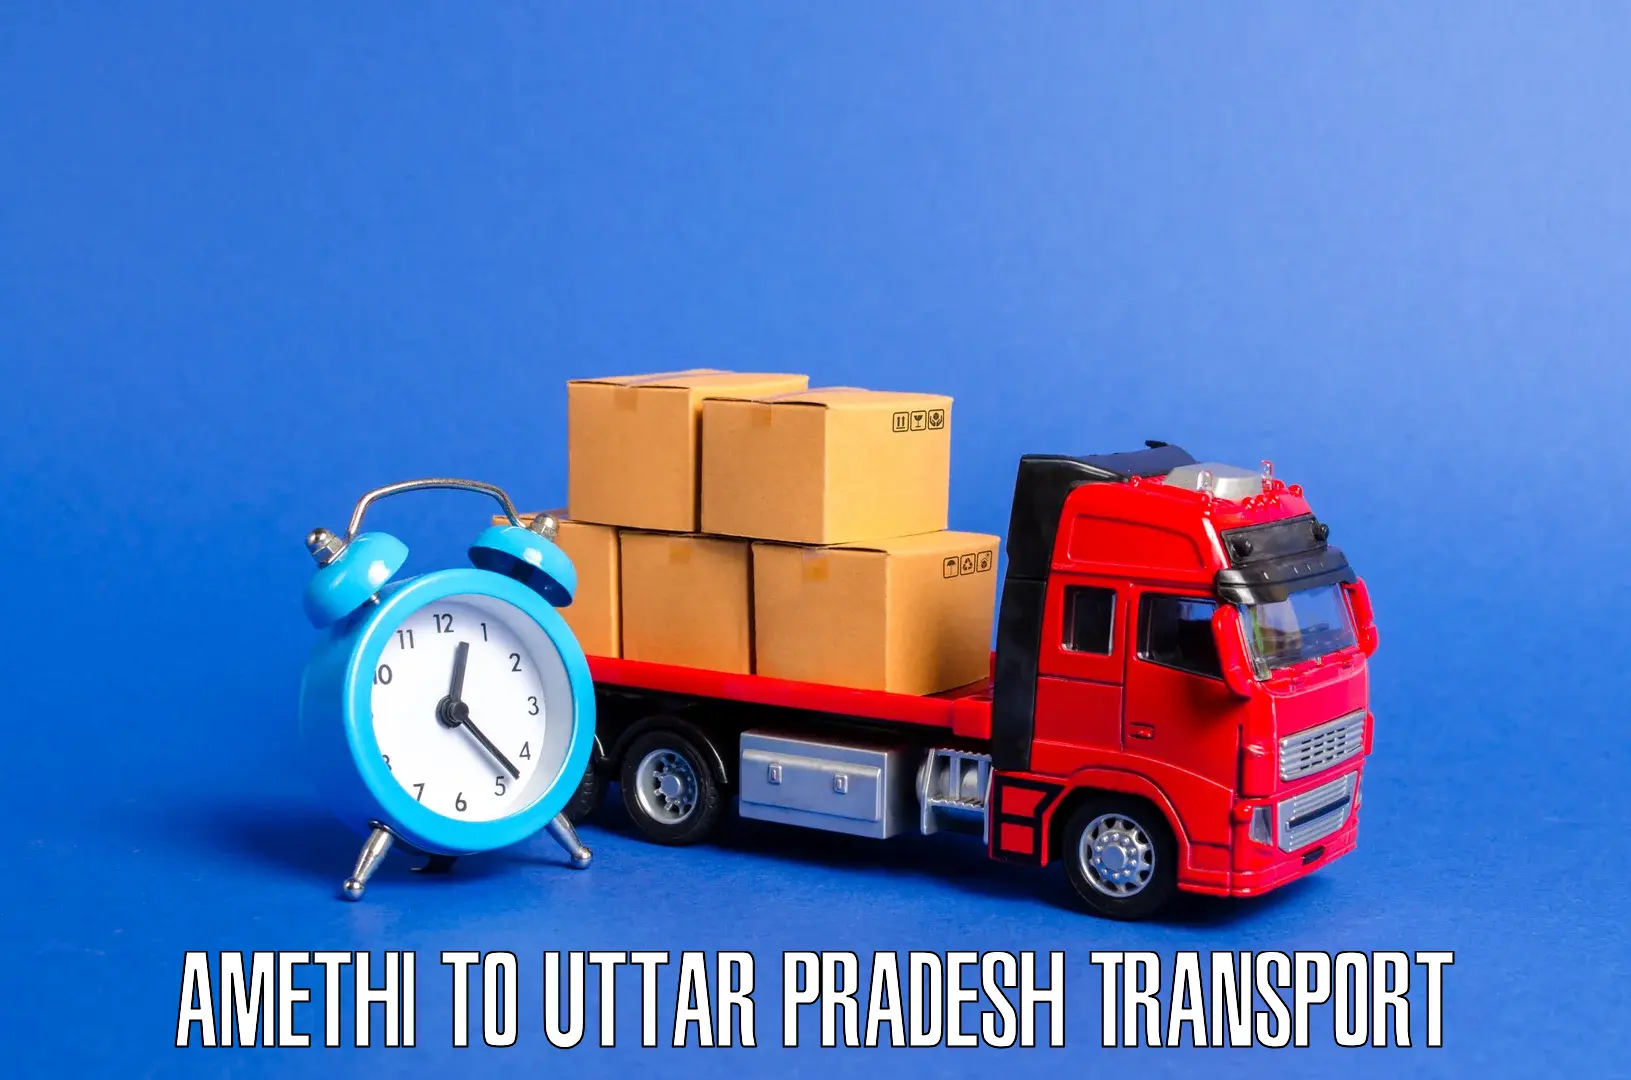 Commercial transport service Amethi to Deoband